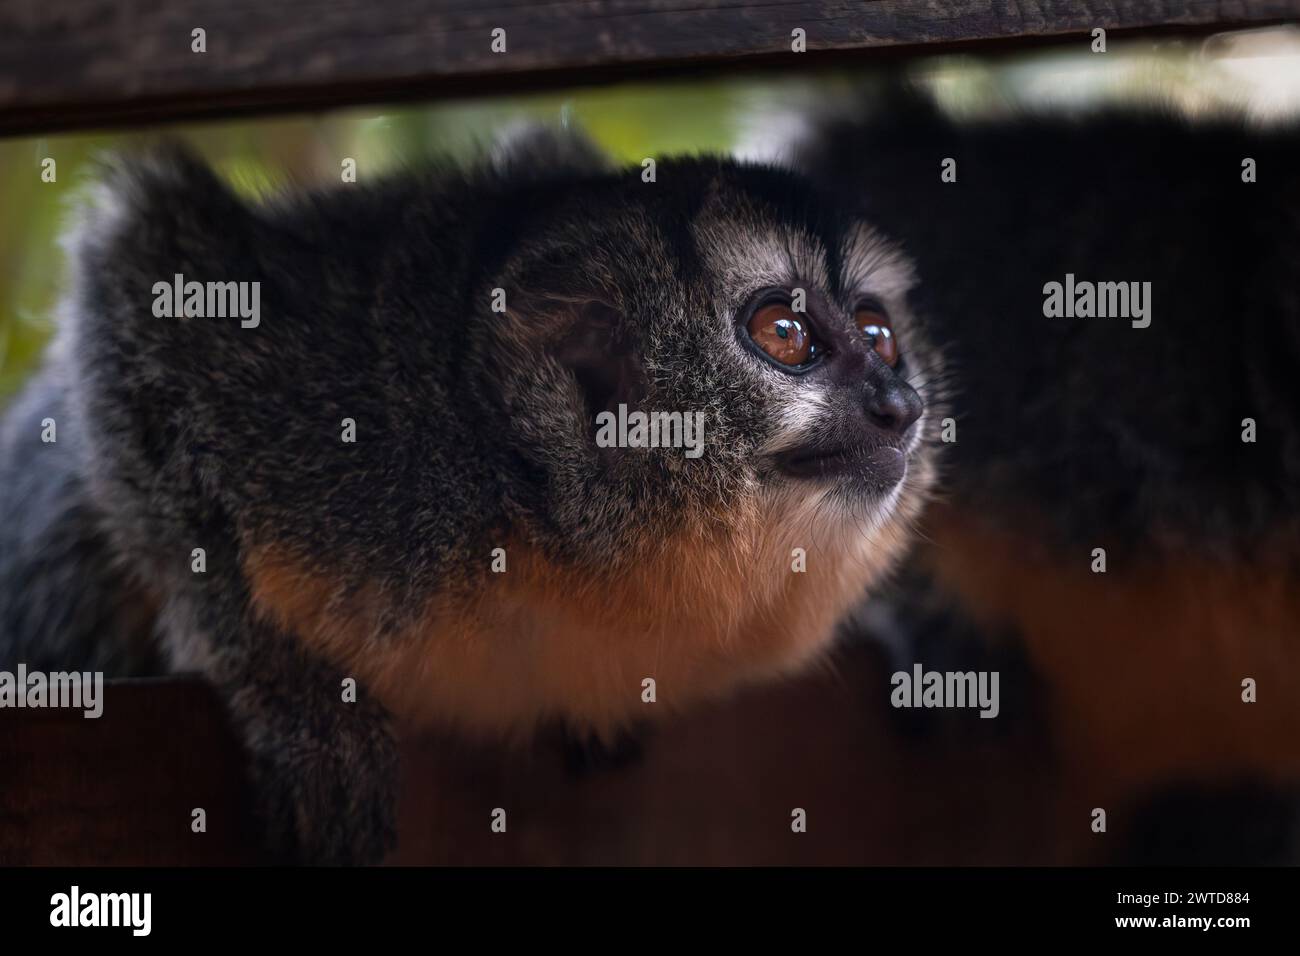 Adorable three-striped night monkey curiously looking at something. Friendly inquisitive monkey close-up. Northern night monkey or owl monkey. Stock Photo